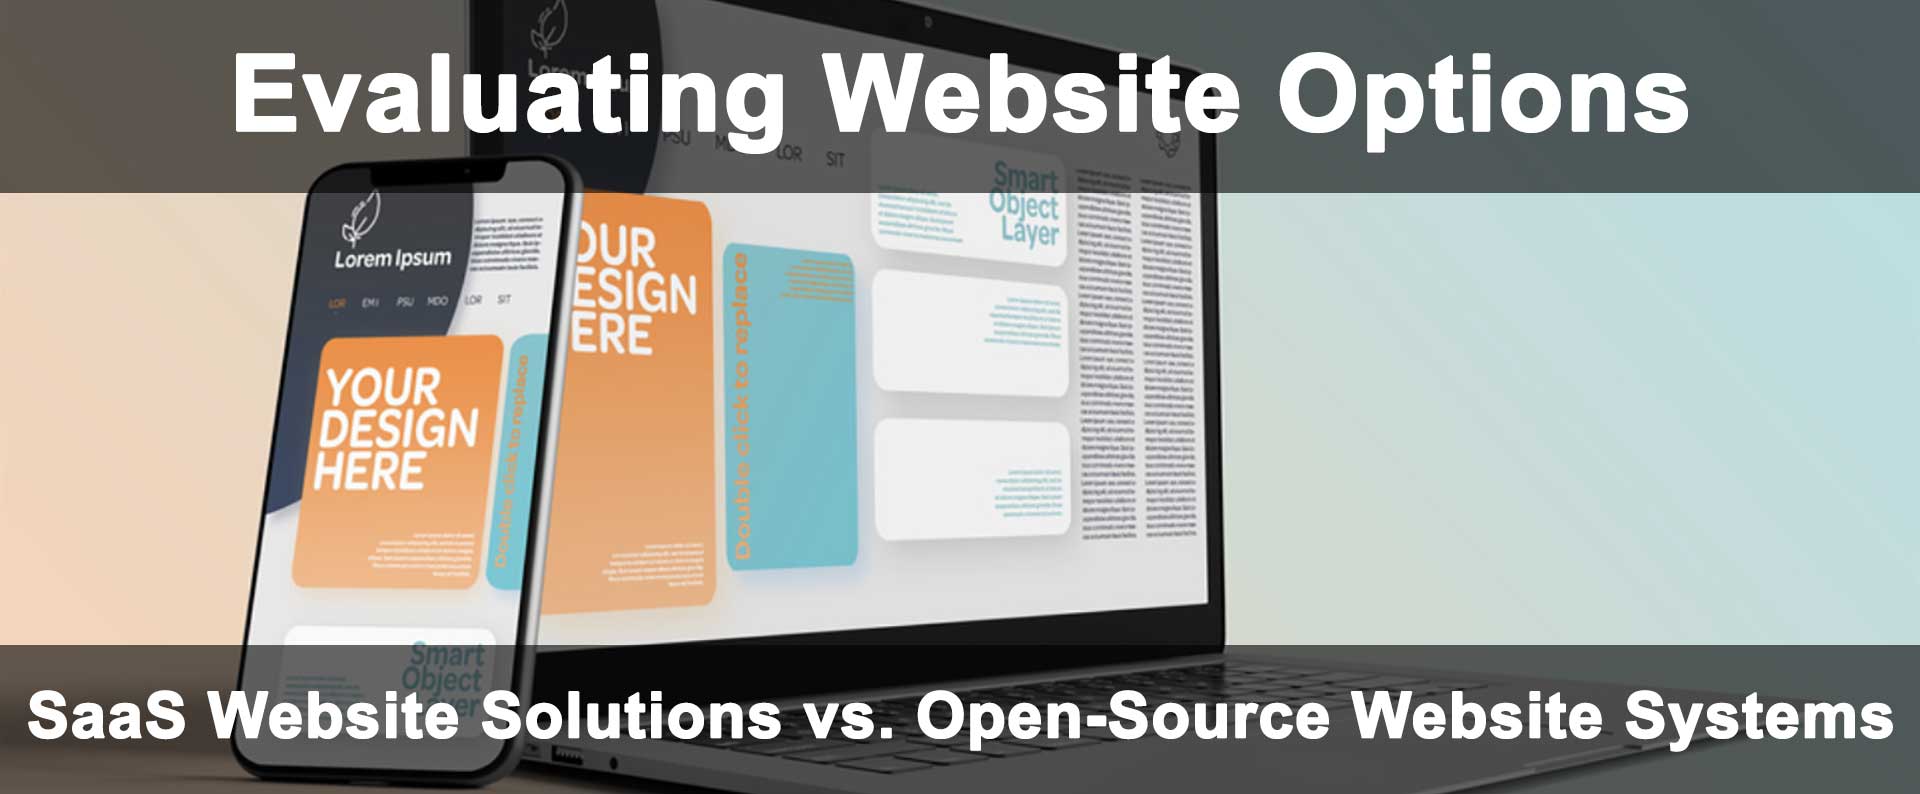 Pros & Cons of SaaS Website Solutions vs. Open-Source Website Systems